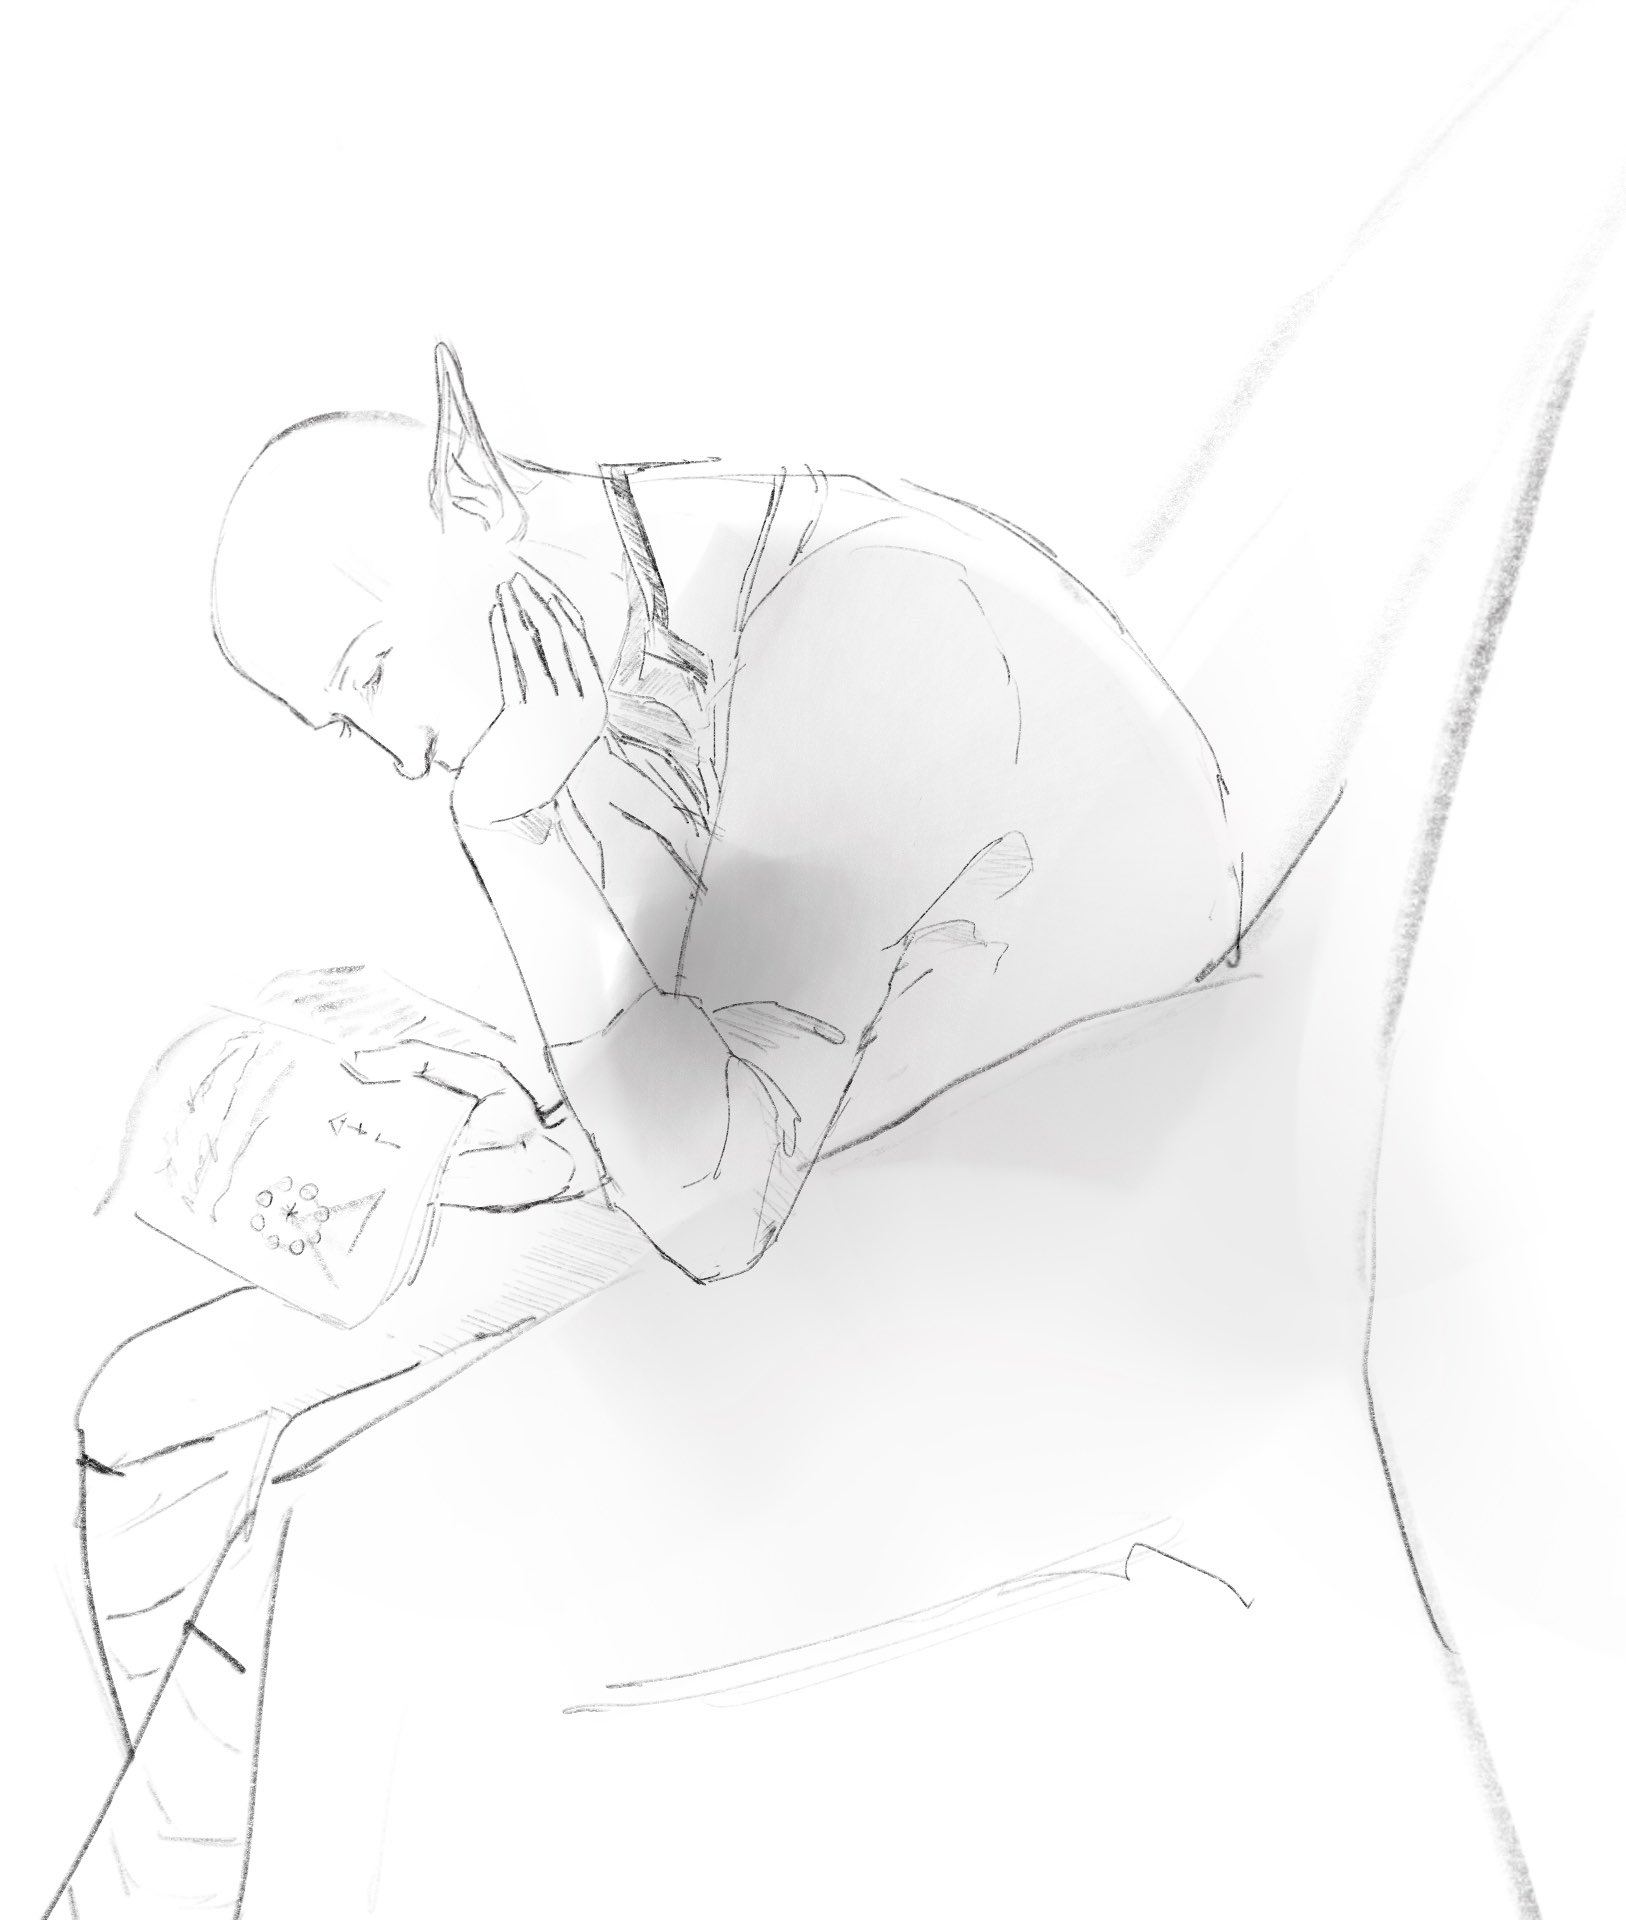 Solas, reading a book on something complicated 